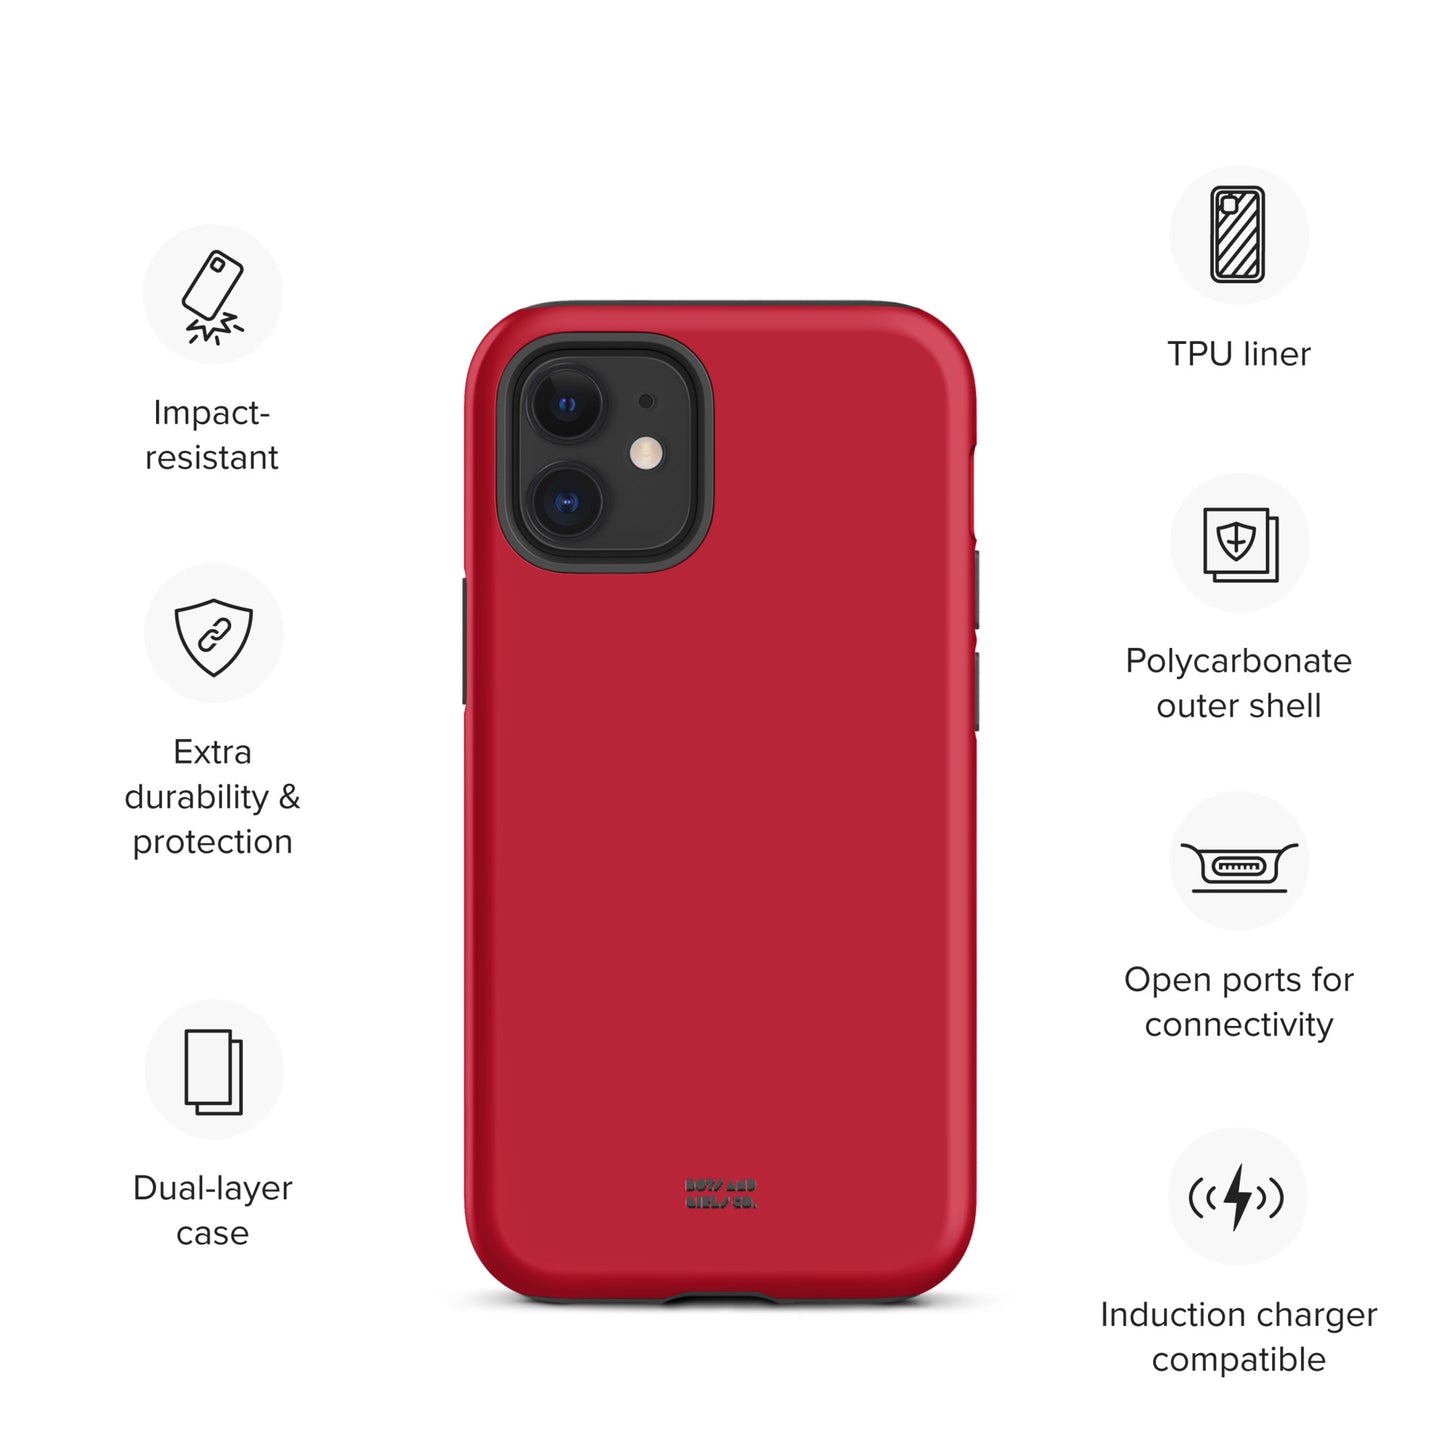 RED - Tough iPhone case